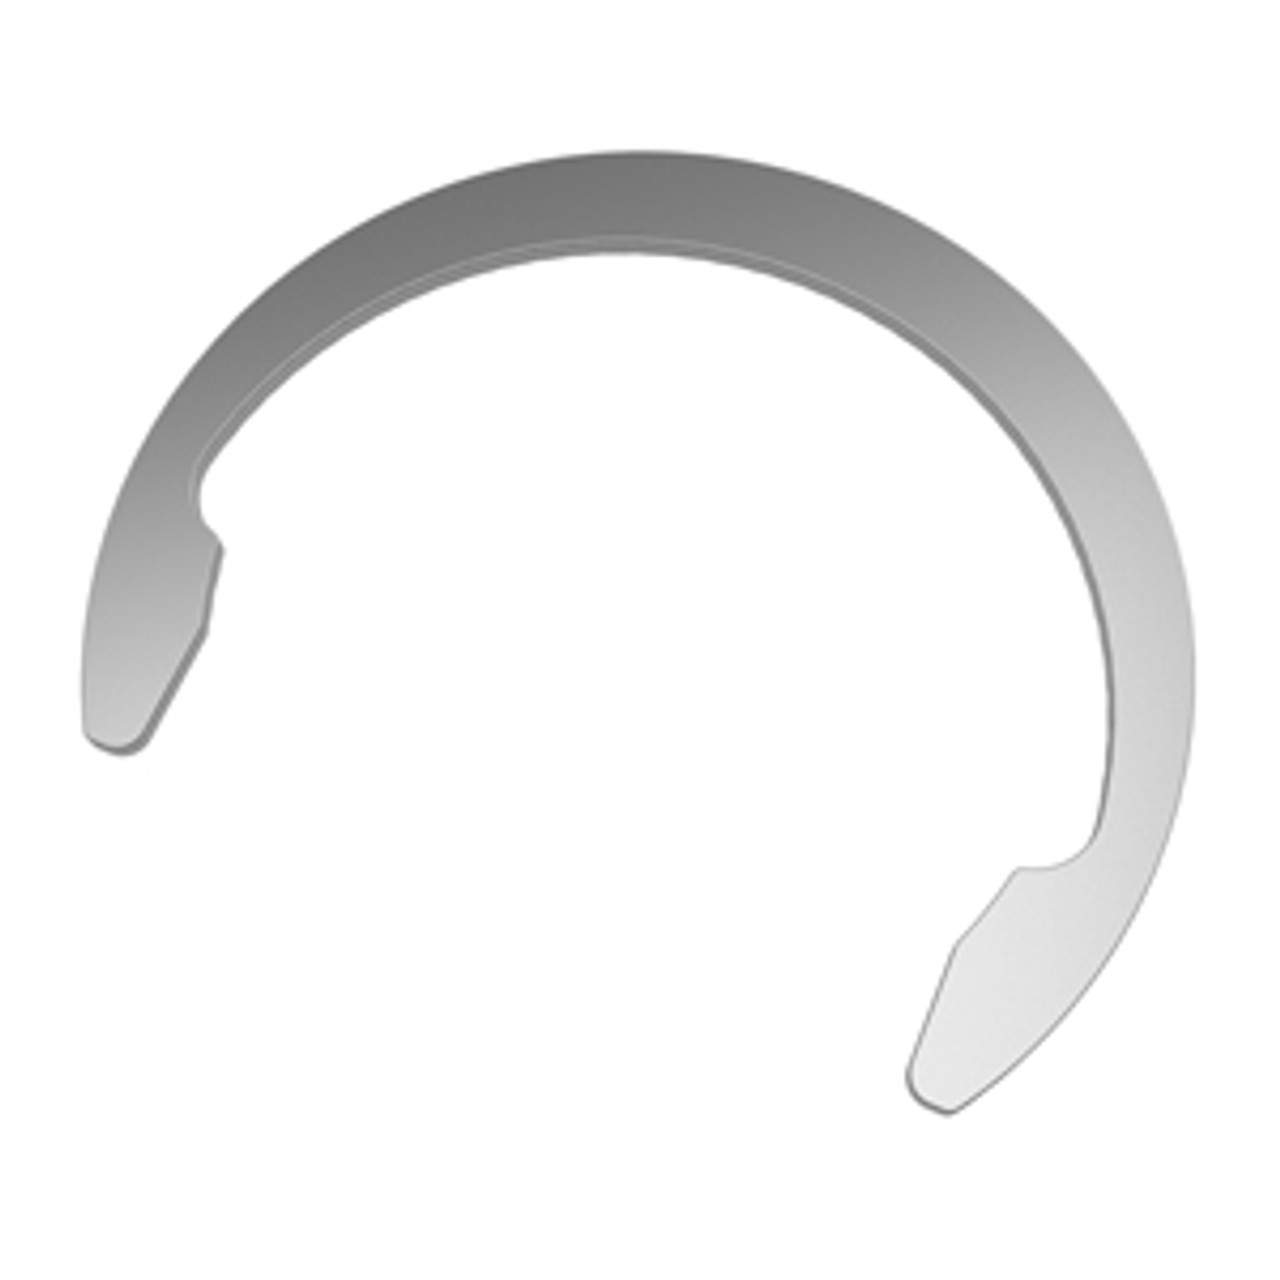 External Metric Phosphated Low Profile Crescent Retaining Ring  DC-040-PA